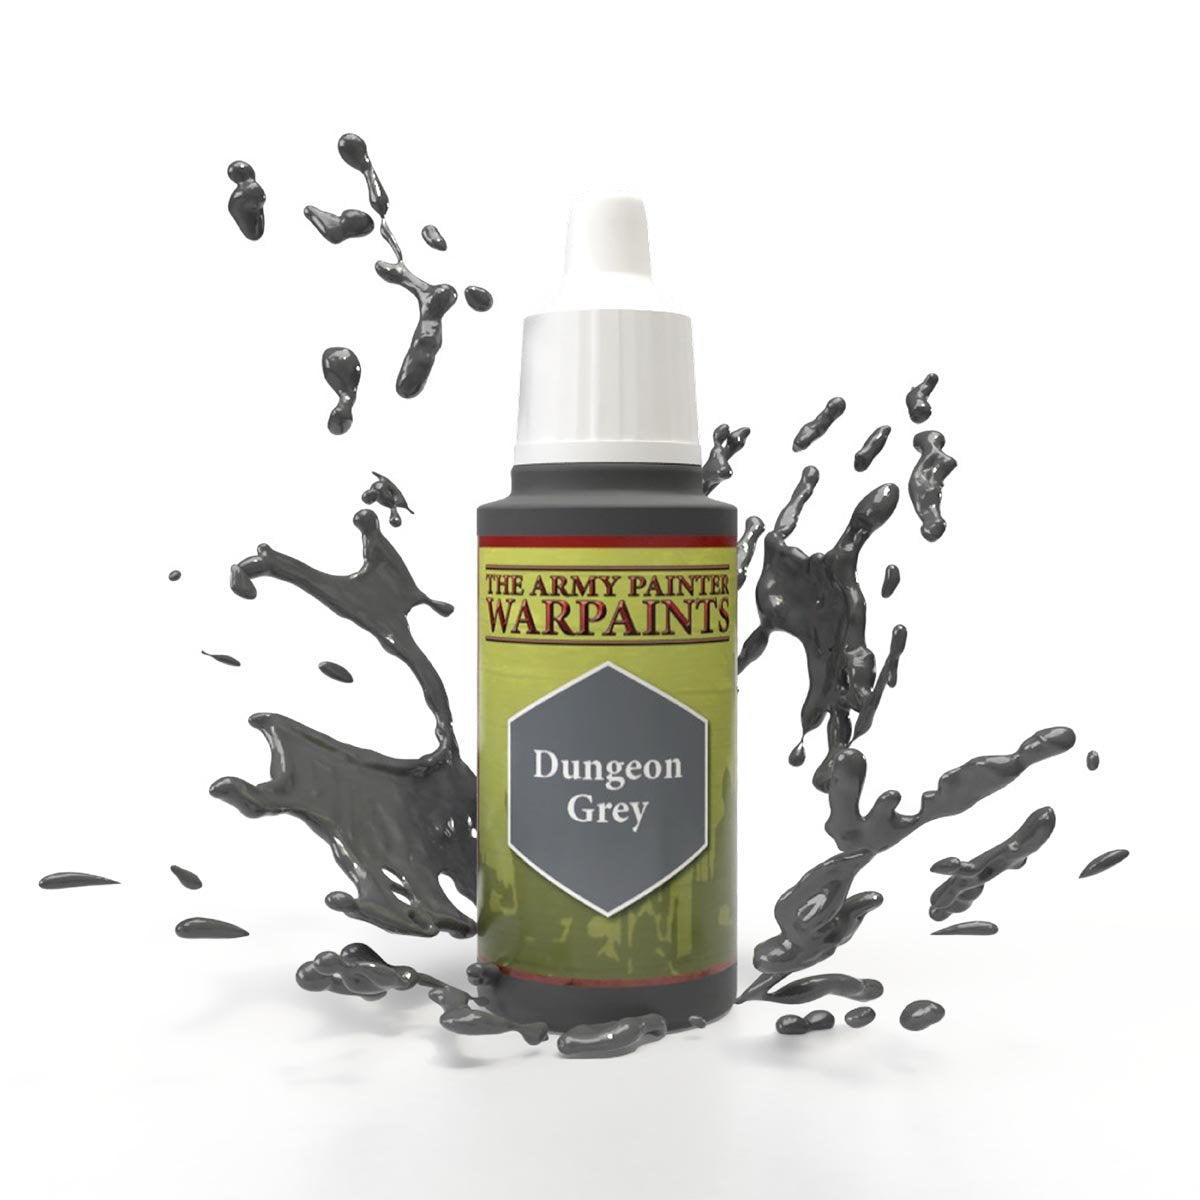 The Army Painter Warpaints WP1418 Dungeon Grey Acrylic Paint 18ml bottle